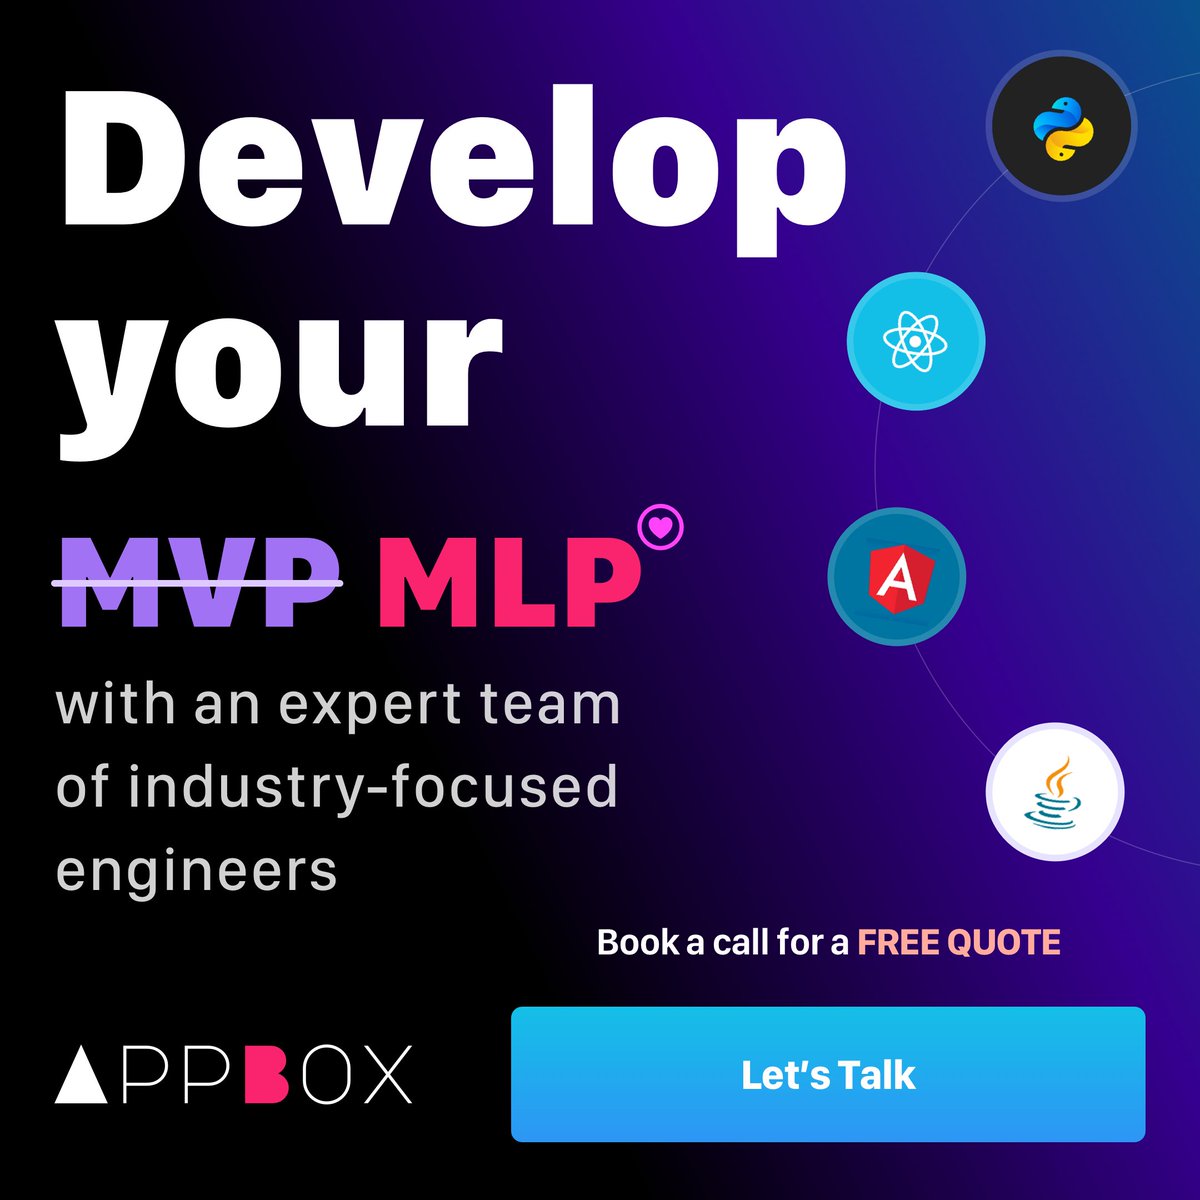 Develop your MLP ❤️ (Minimum Lovable Product) with an expert team of industry-focused engineers.

Book a call for a FREE QUOTE 🤩
calendly.com/simran_maharjan

appboxtech.com/app/

#qualitydevelopment #bestwork #happyusers #development #appdevelopment